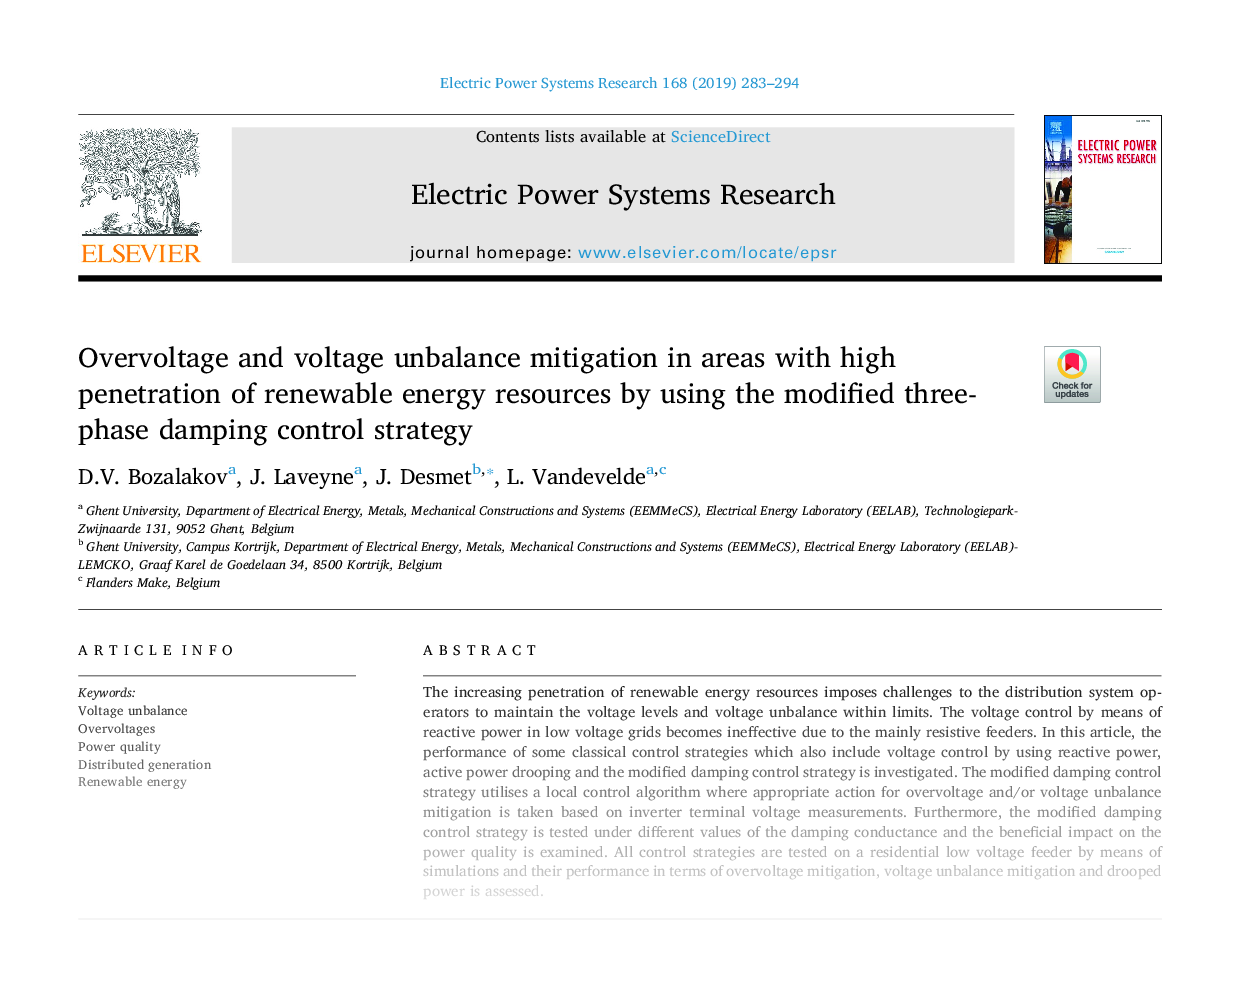 Overvoltage and voltage unbalance mitigation in areas with high penetration of renewable energy resources by using the modified three-phase damping control strategy